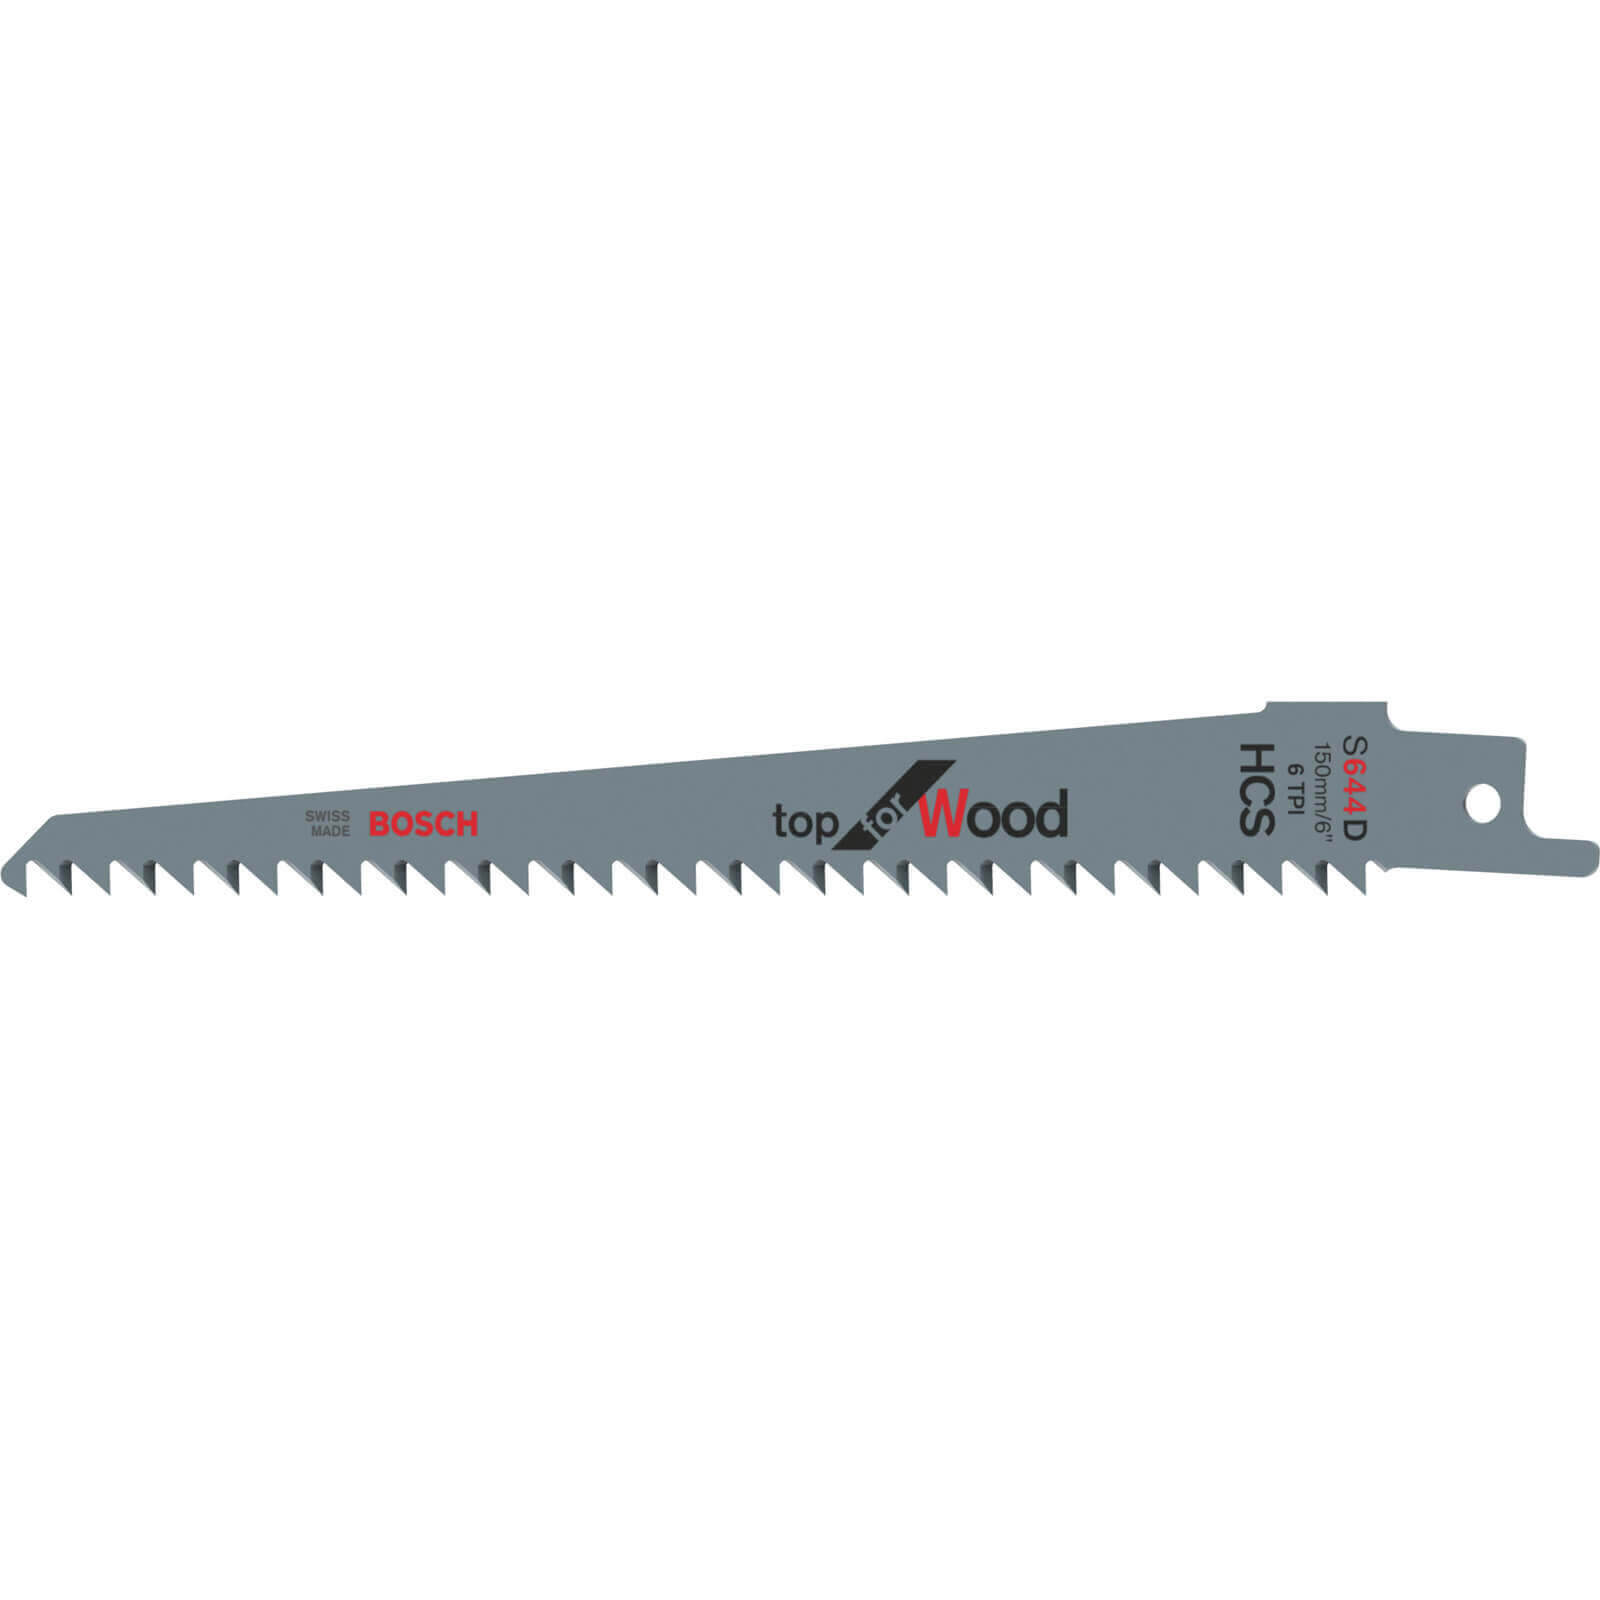 Photo of Bosch S644d Reciprocating Saw Blades Pack Of 5